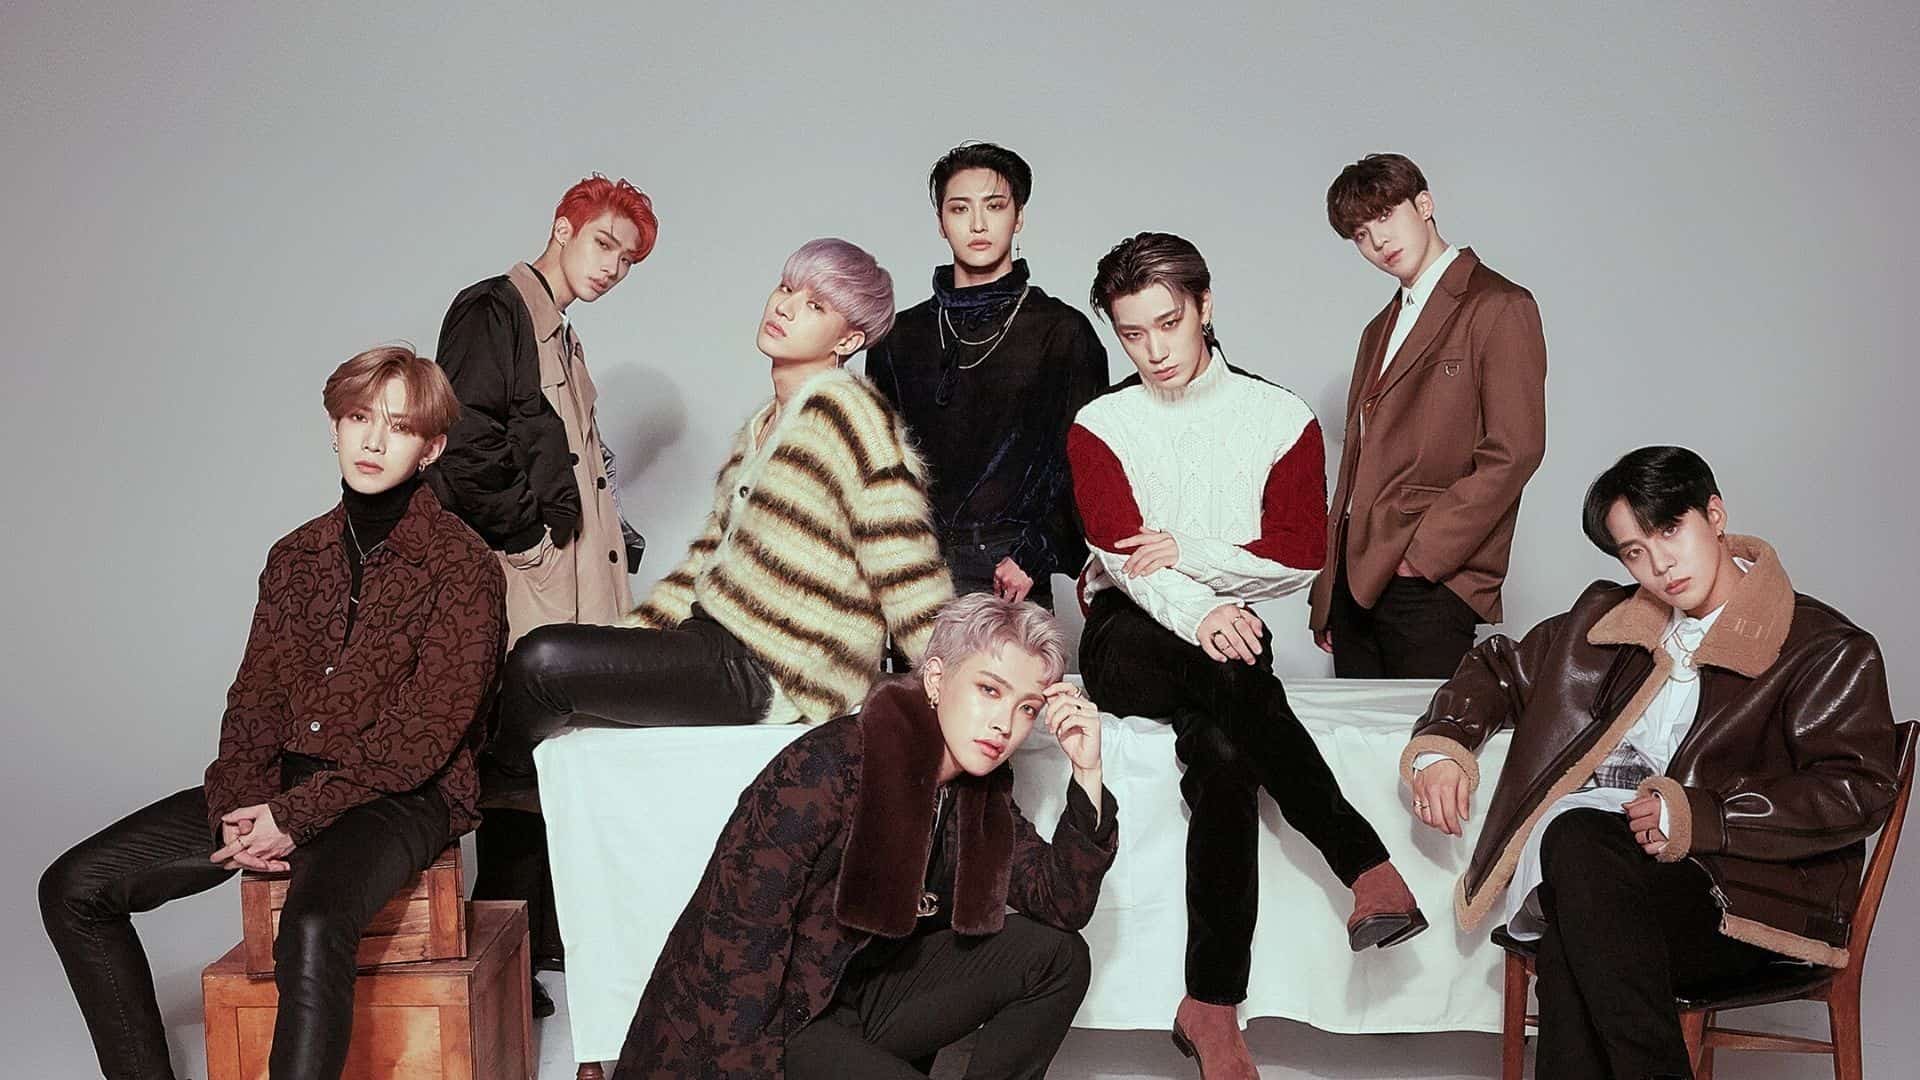 Don't overlook these manufacturers, including Full Sent and Drew, which Ateez brand loves to wear indoors or outside